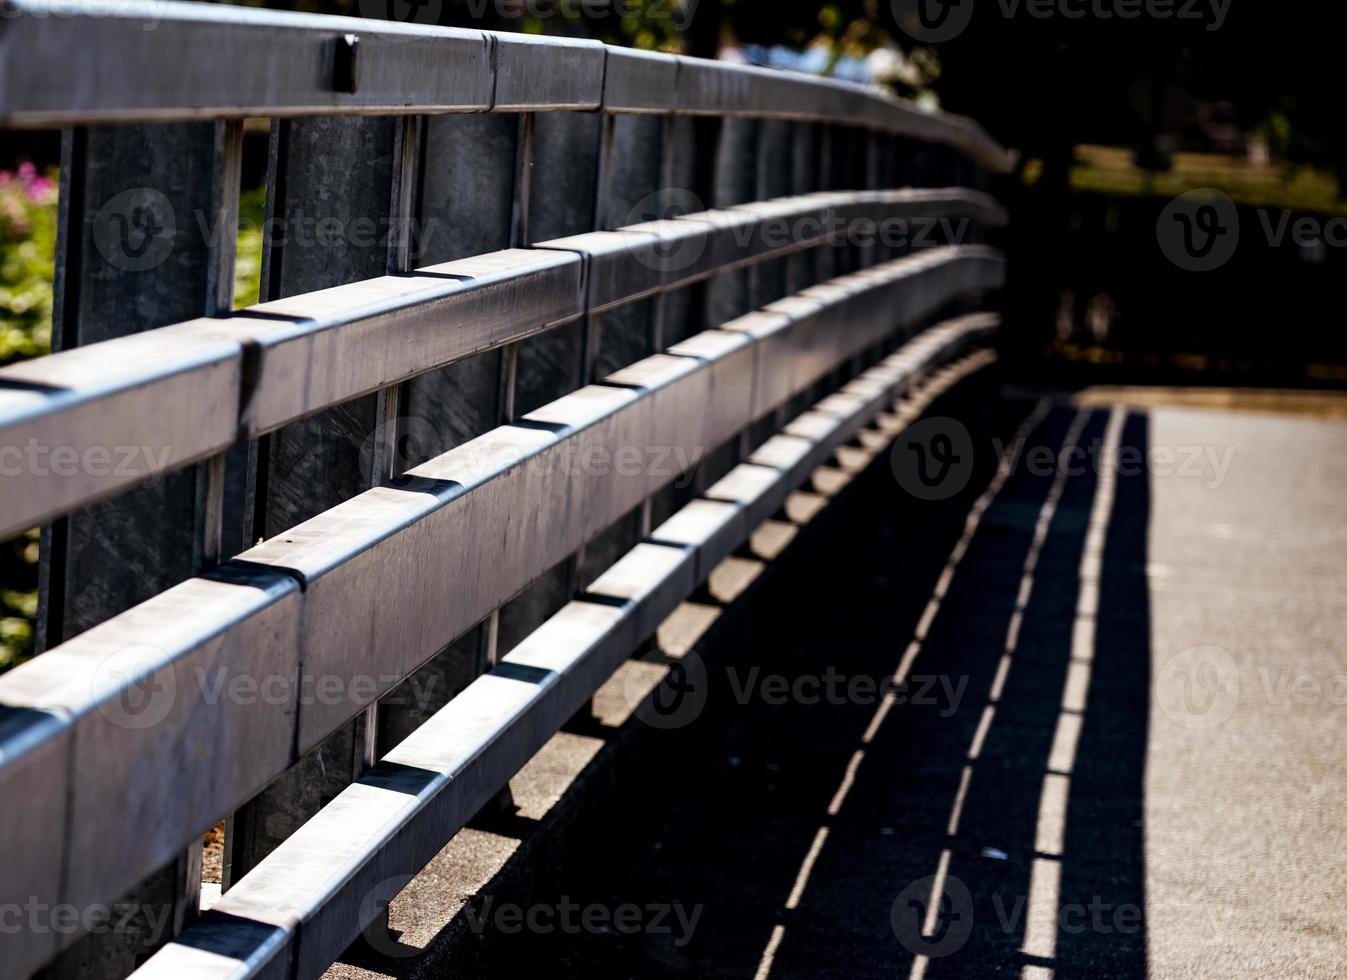 Abstract steel hand rails casting a shadow photo